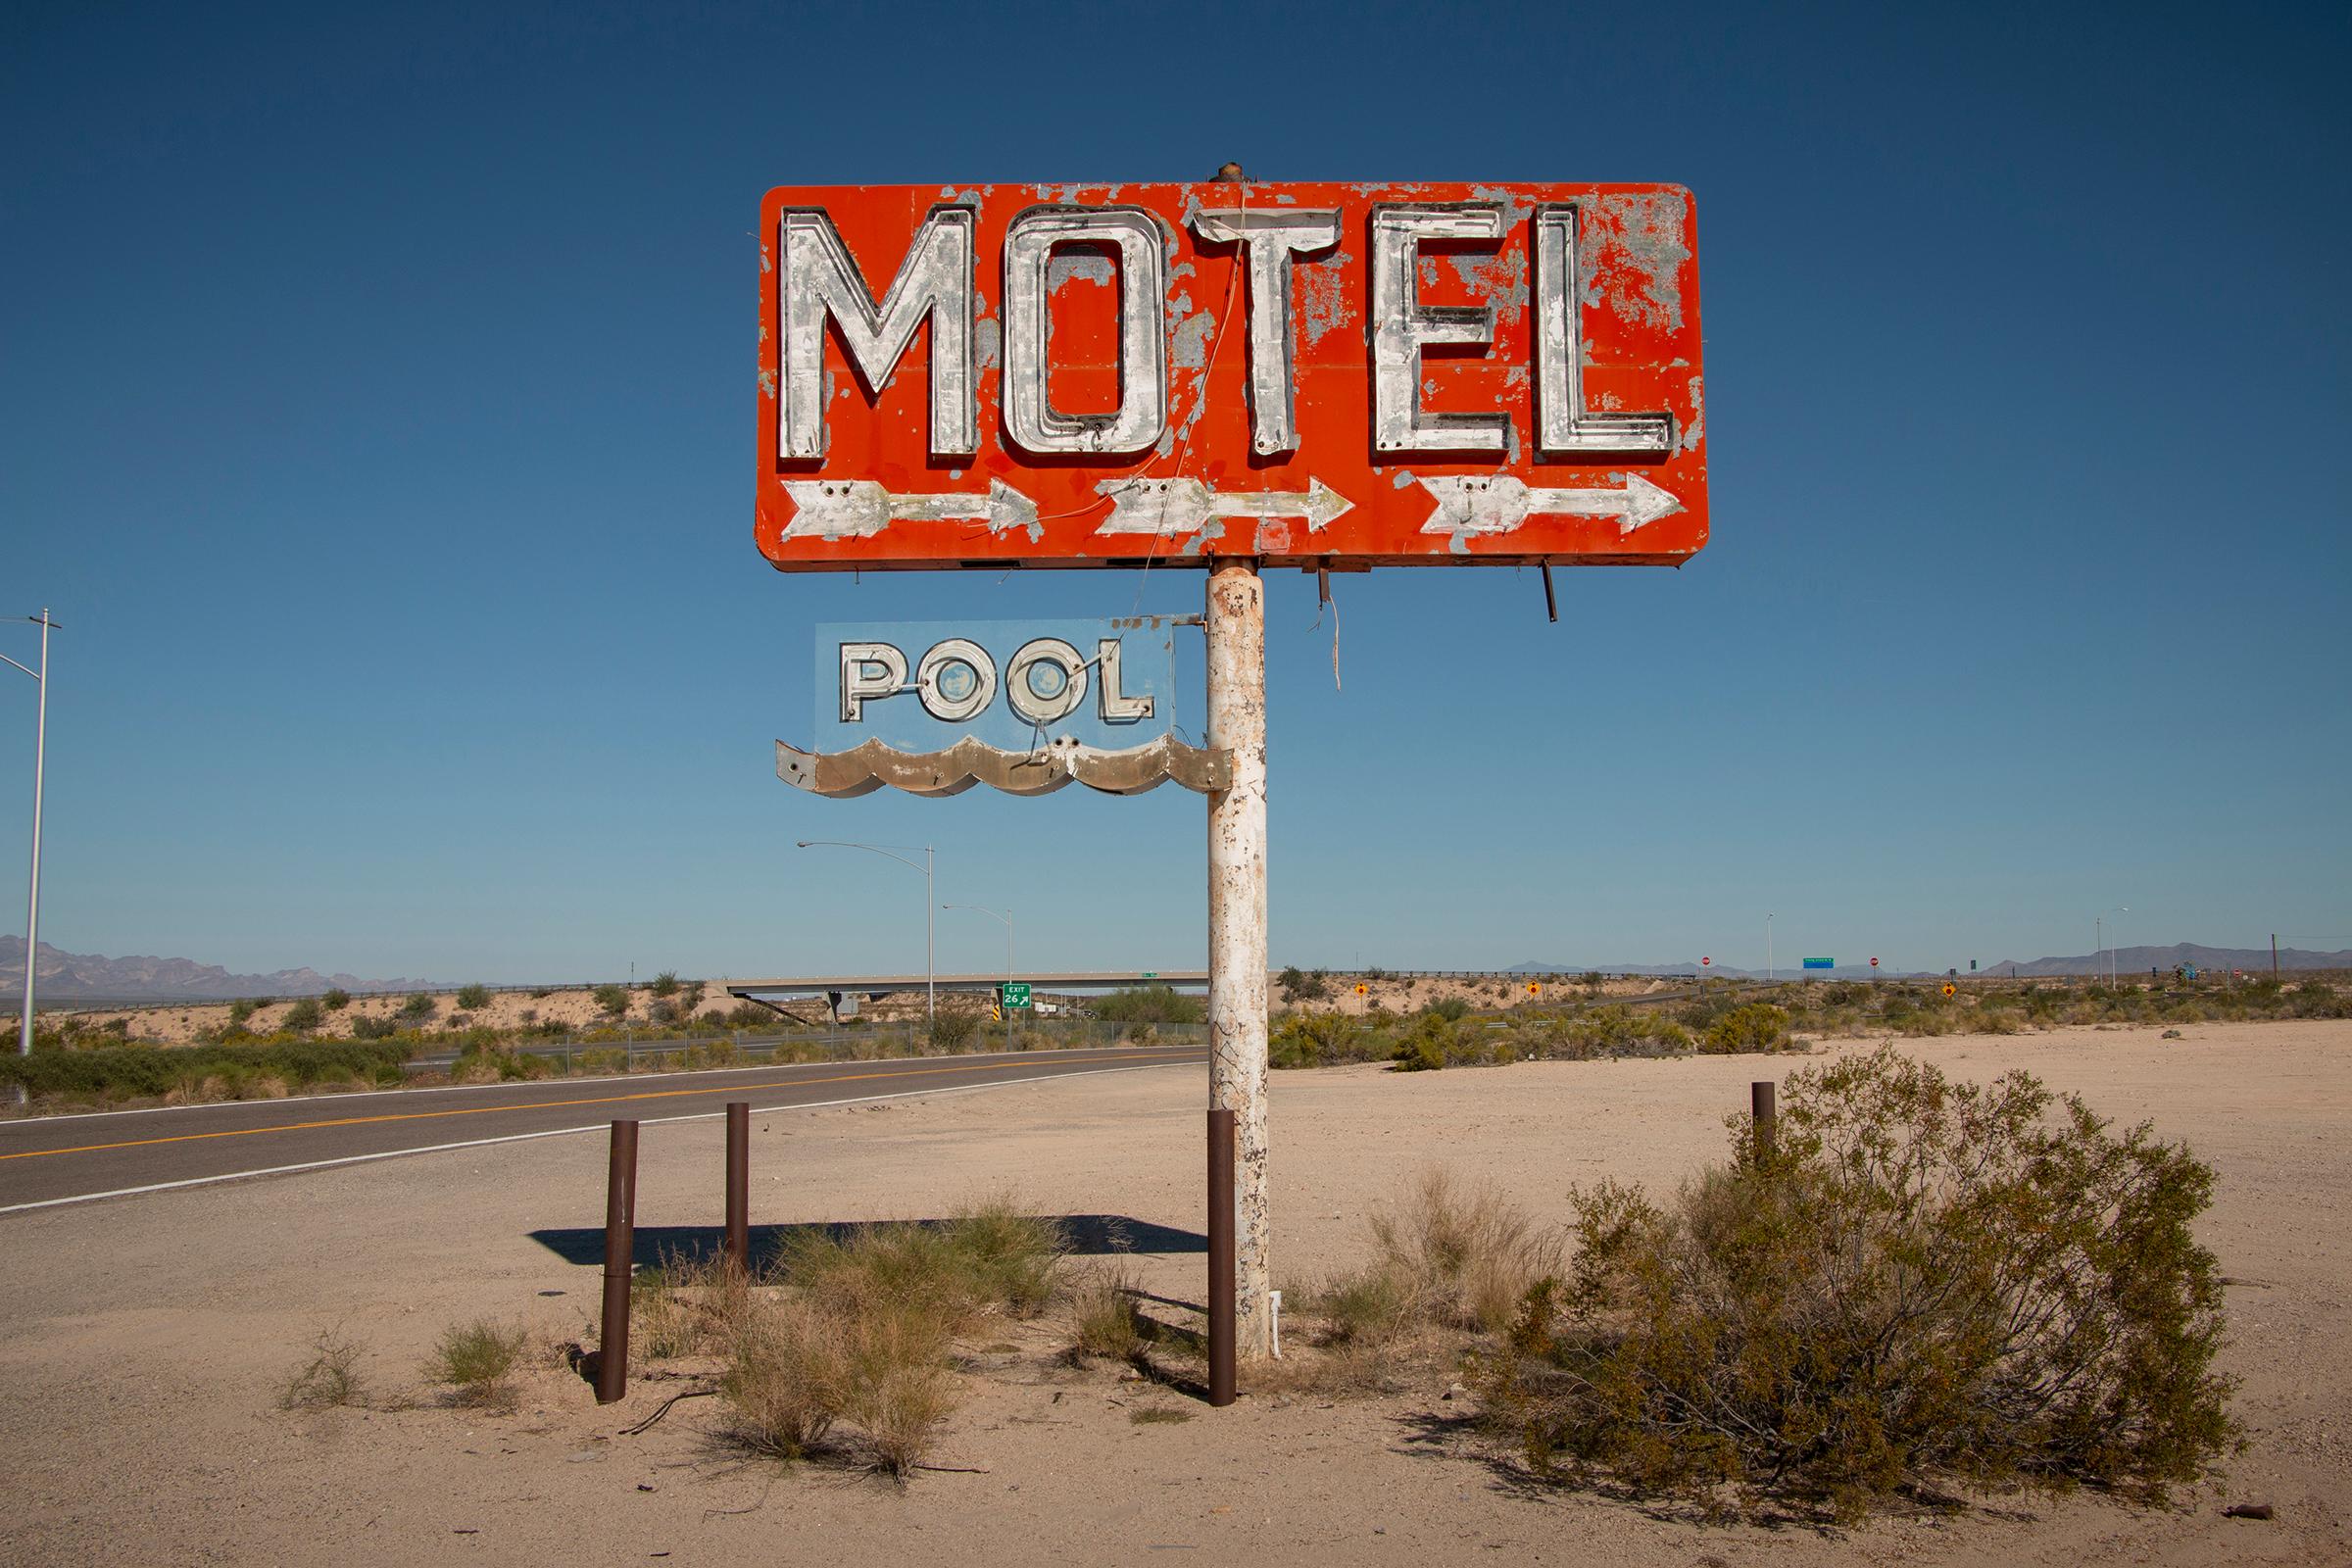 Motel Pool - Photograph by Steve Lewis